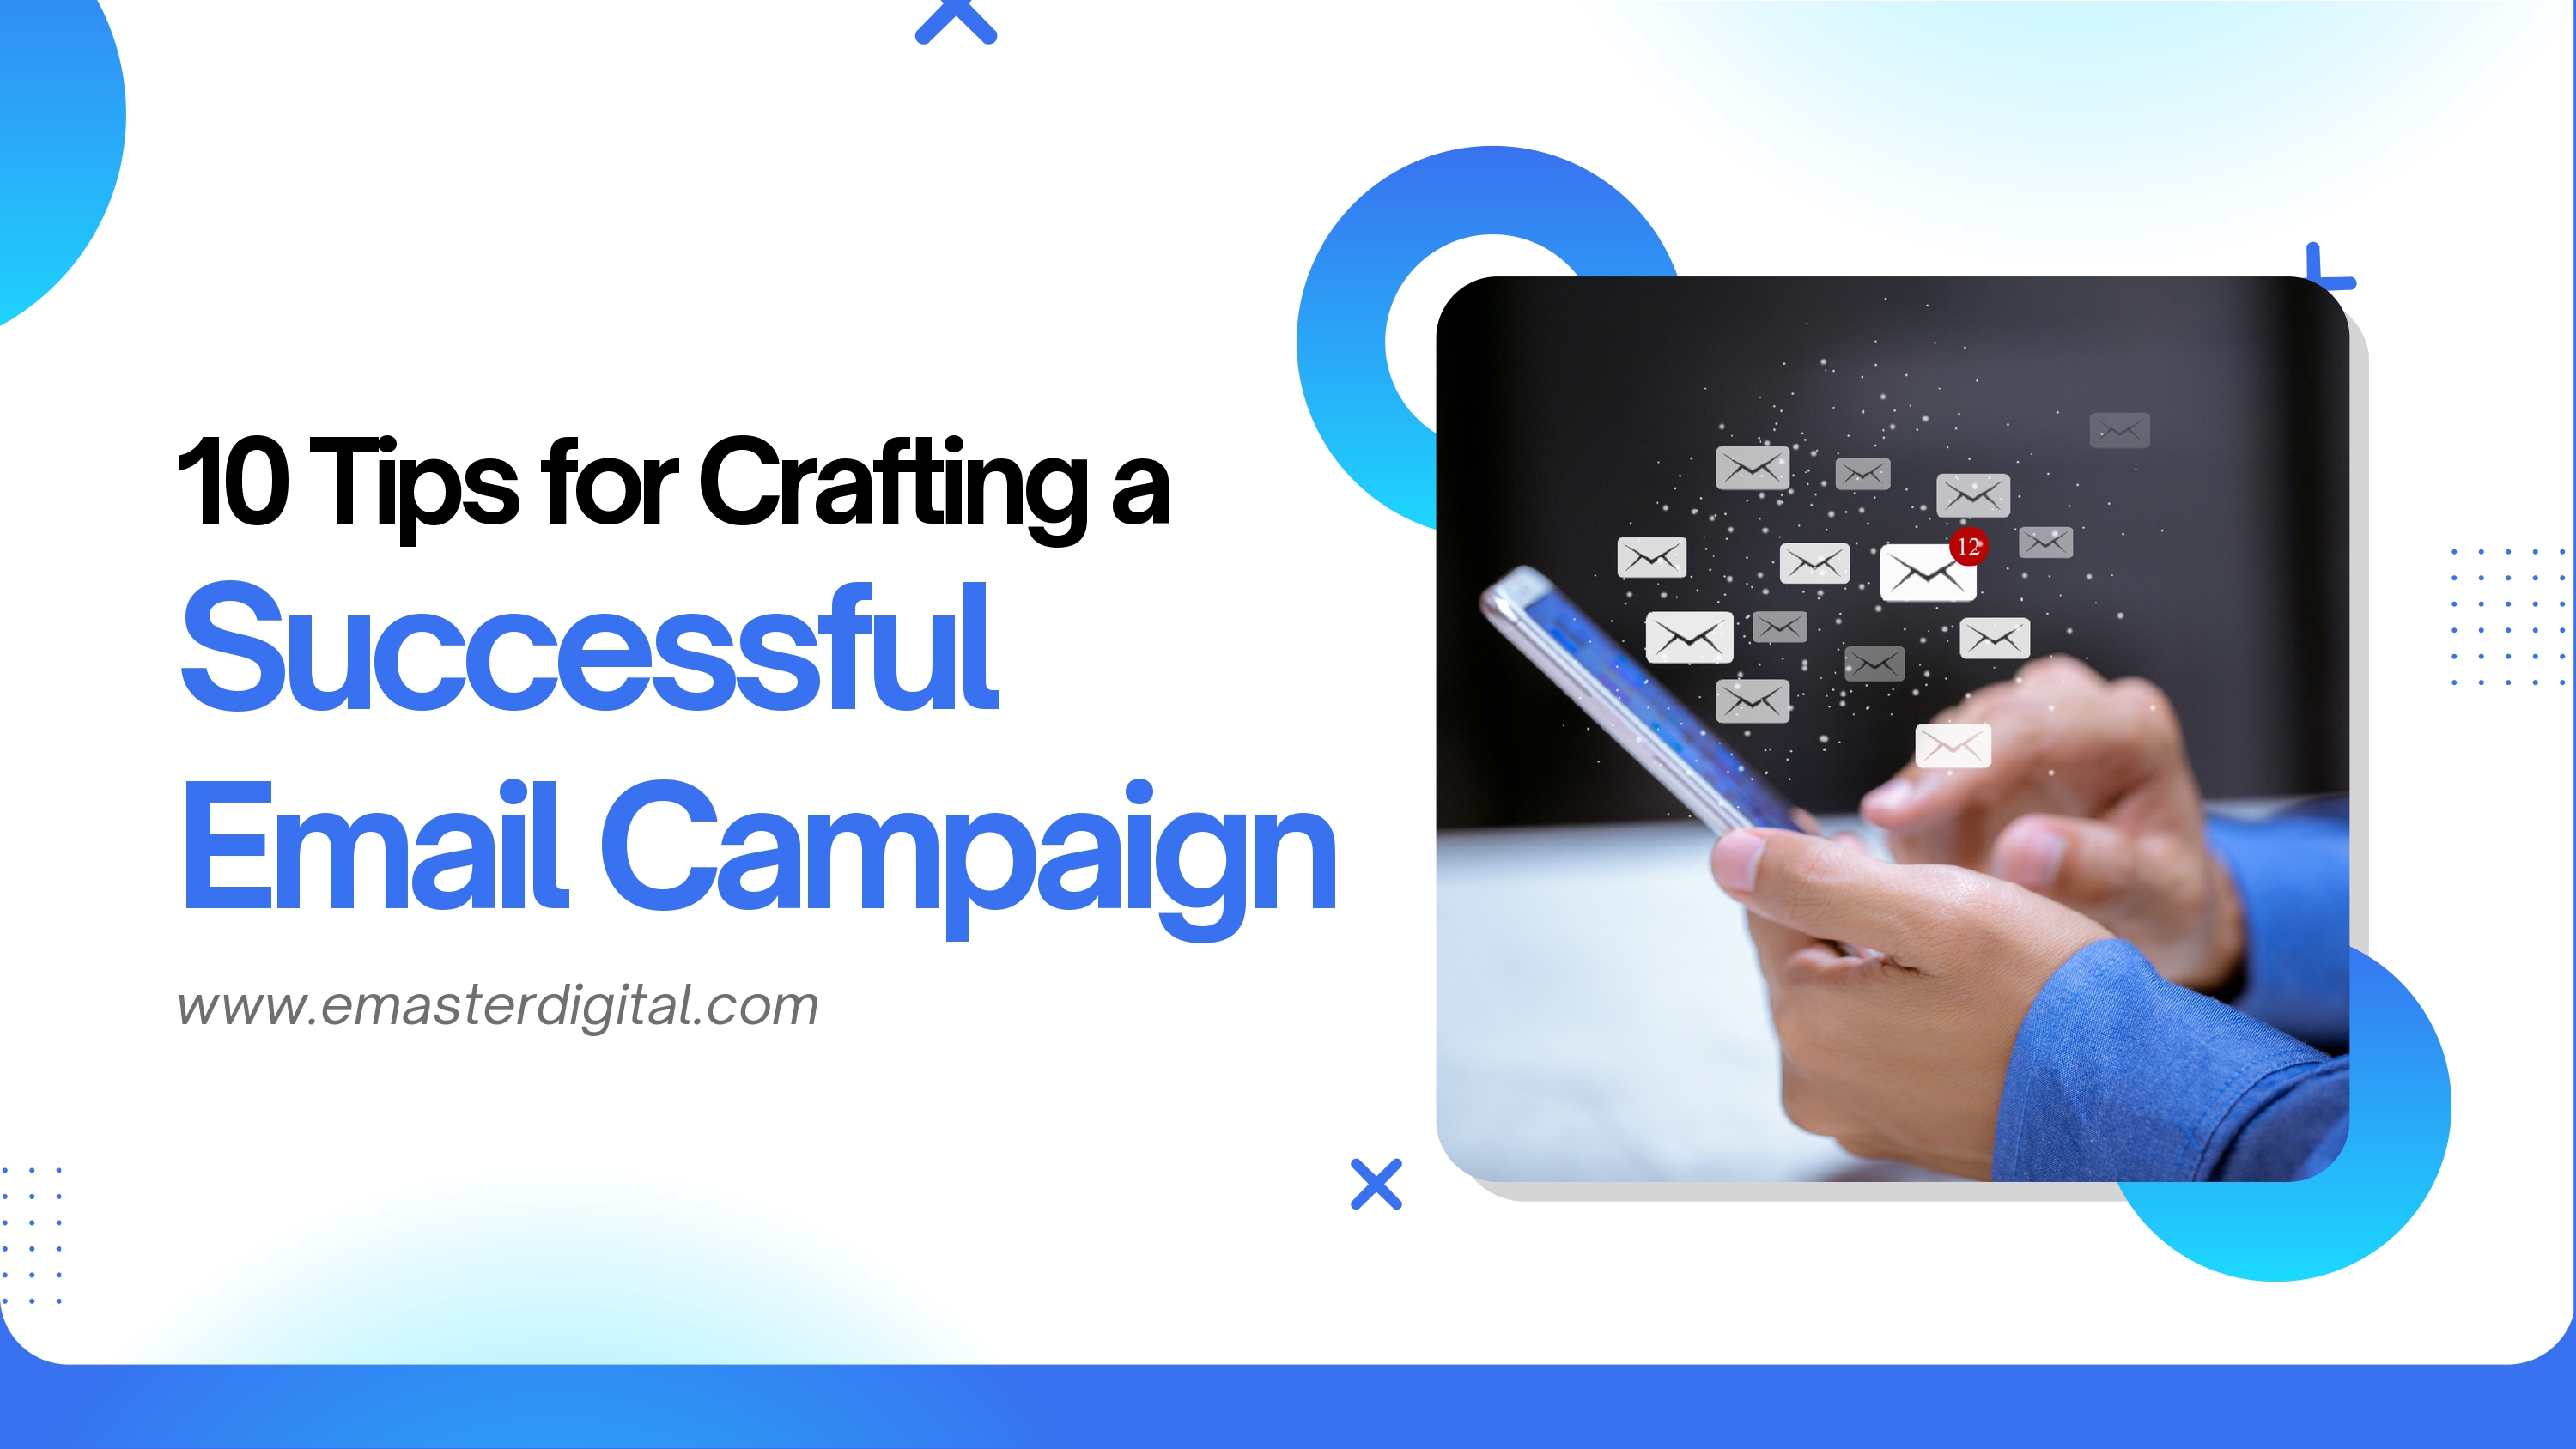 10 Tips for Crafting a Successful Email Campaign